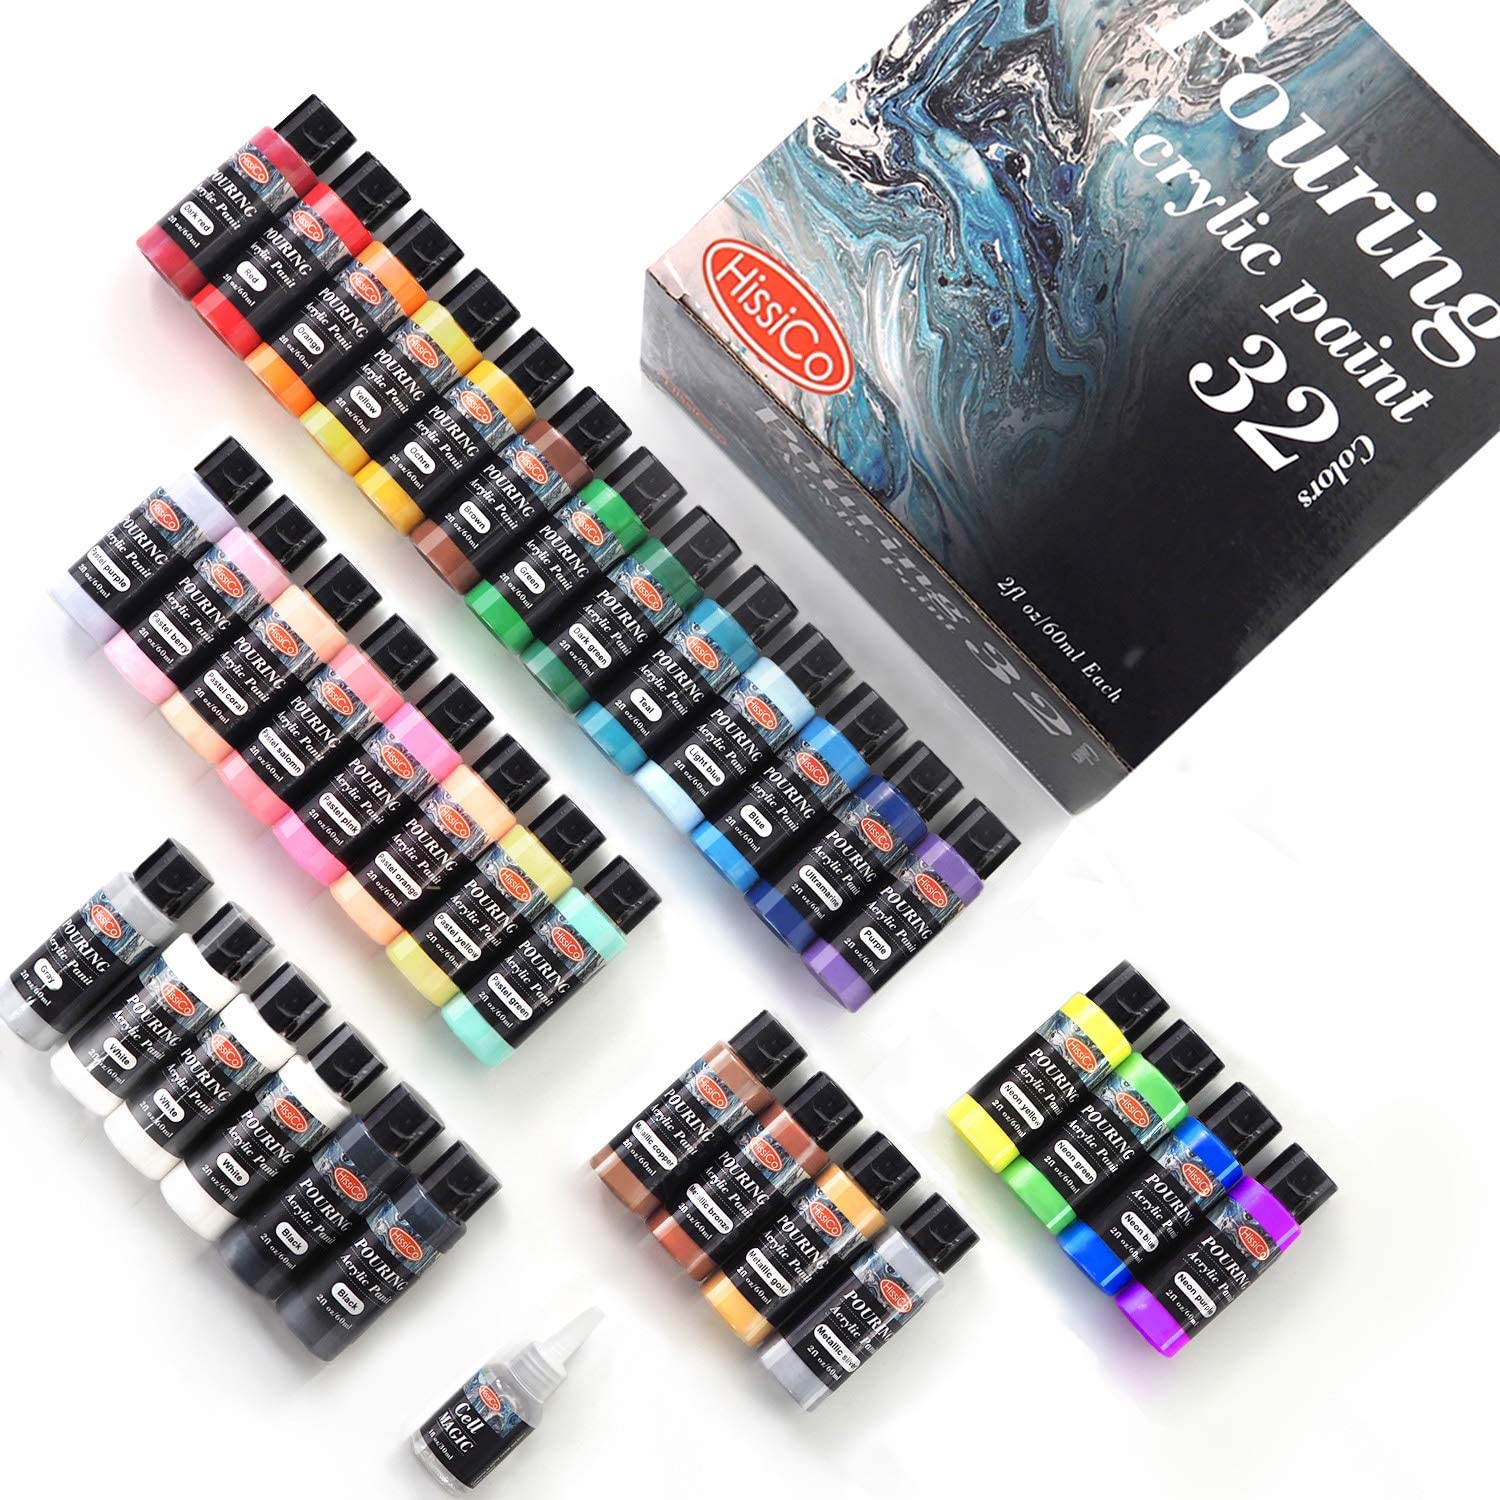 Funto Acrylic Pouring Paint Set, 36 Bottles(2oz), with Silicone Oil, High  Flow, Pre-Mixed, Assorted Colors, Art Supplies for Pouring on Canvas,  Glass